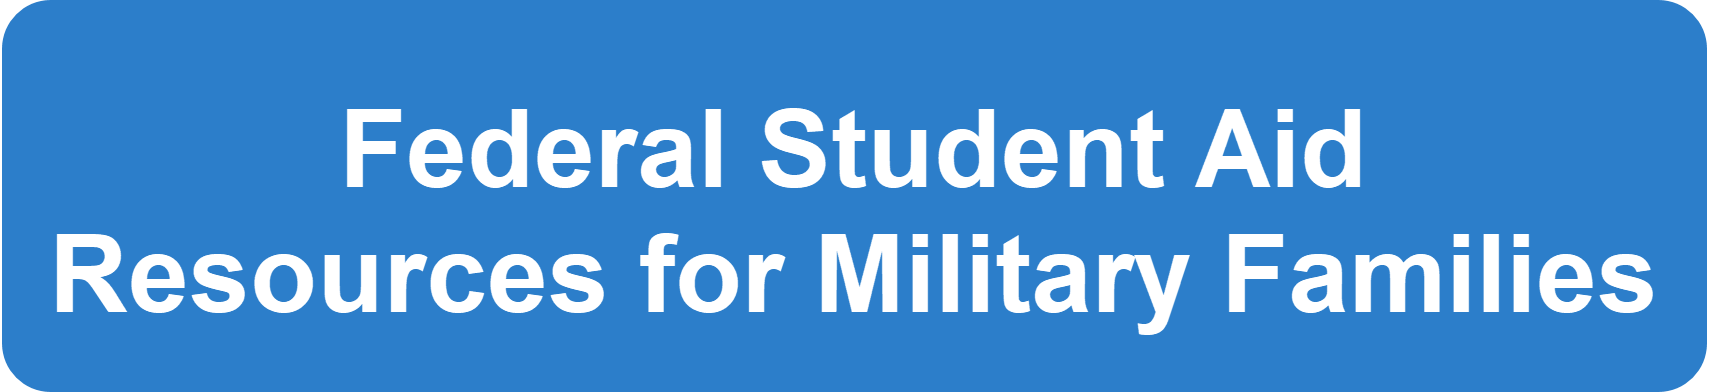 Federal Student Aid Resources for Military Families